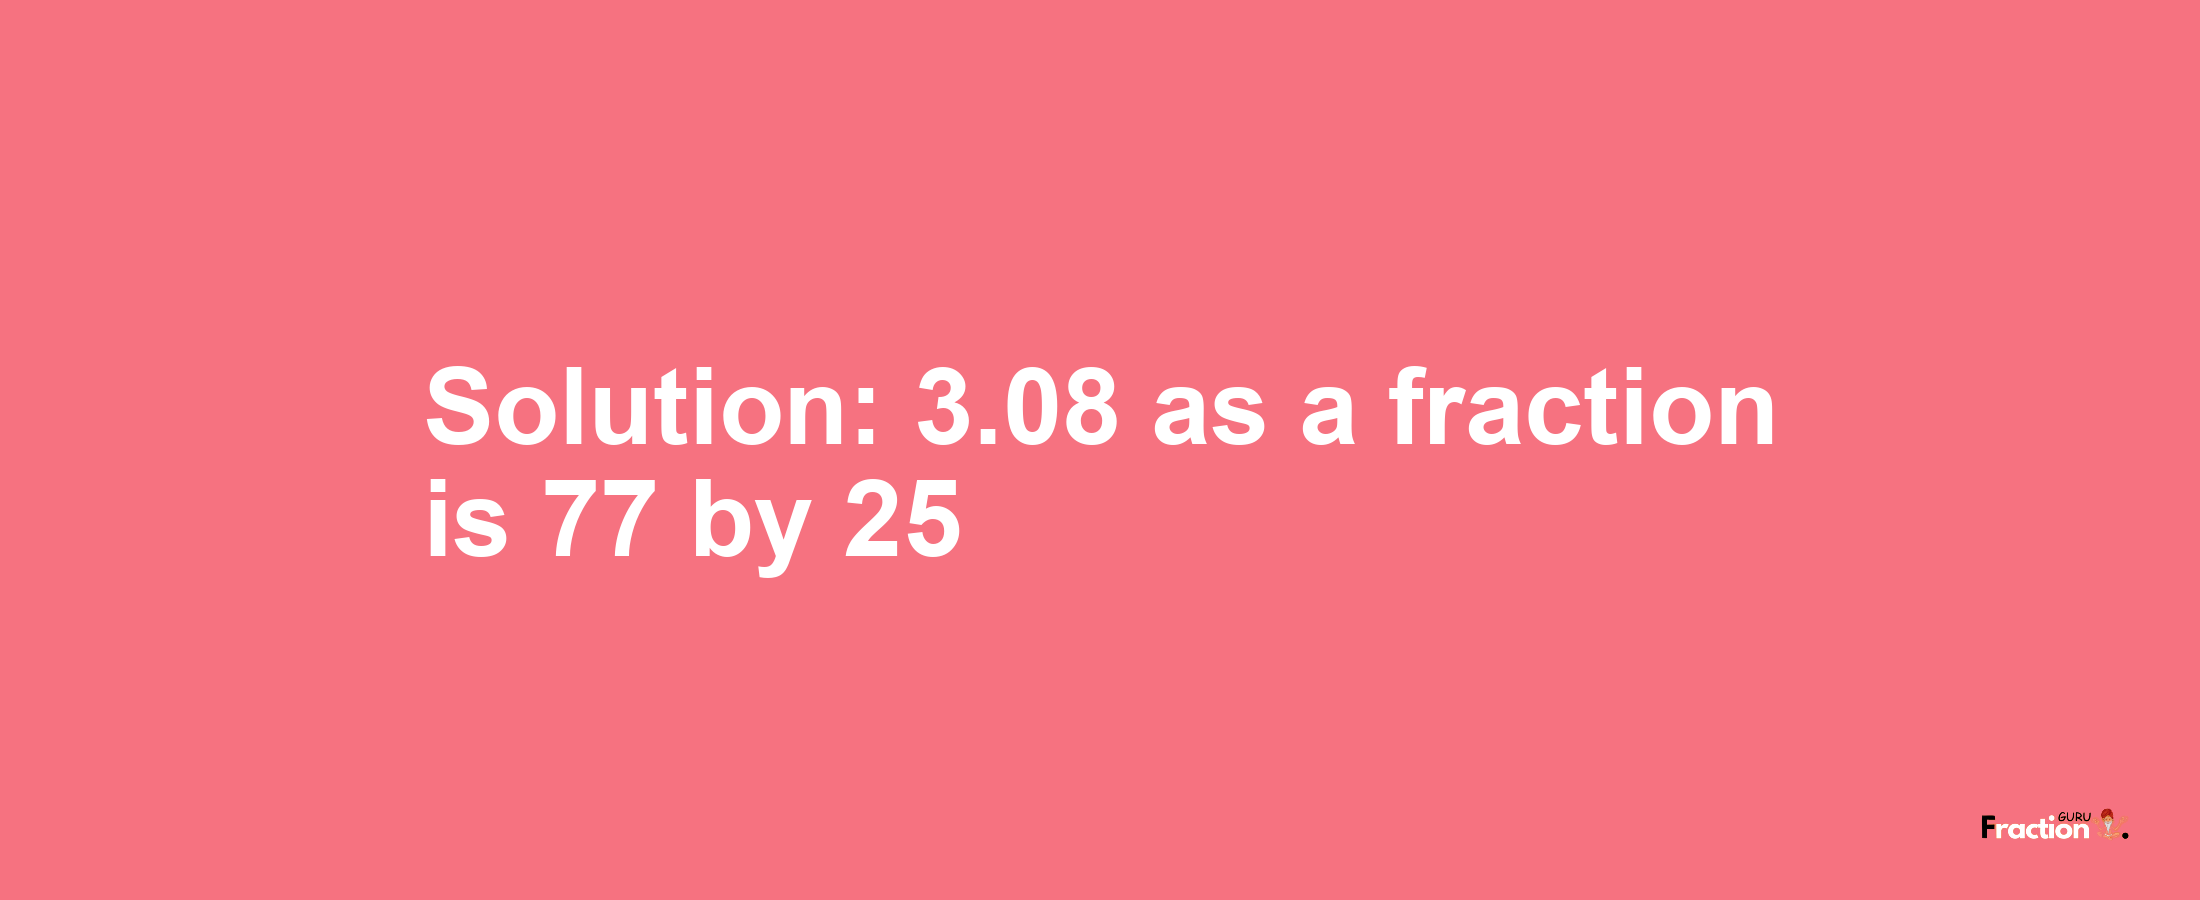 Solution:3.08 as a fraction is 77/25